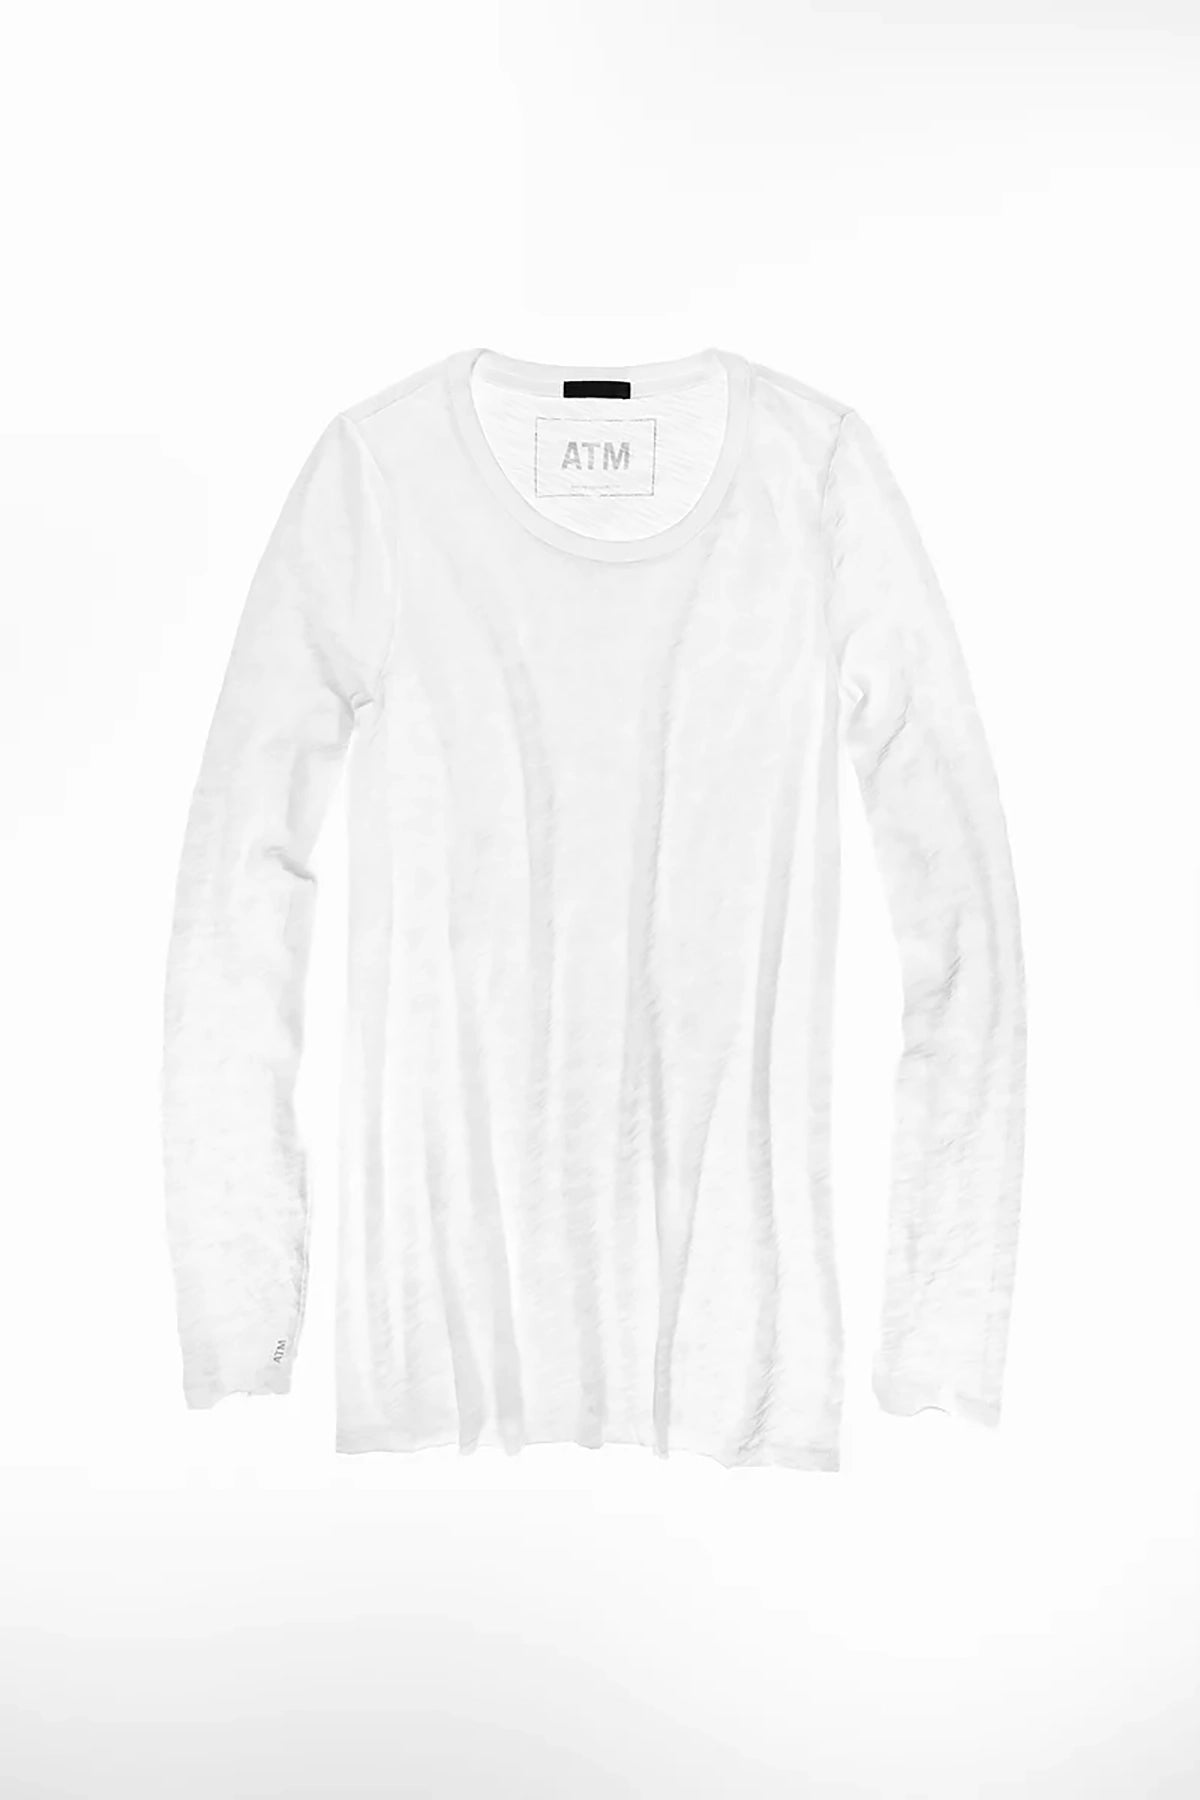 ATM Destroyed Long Sleeve Crew Top